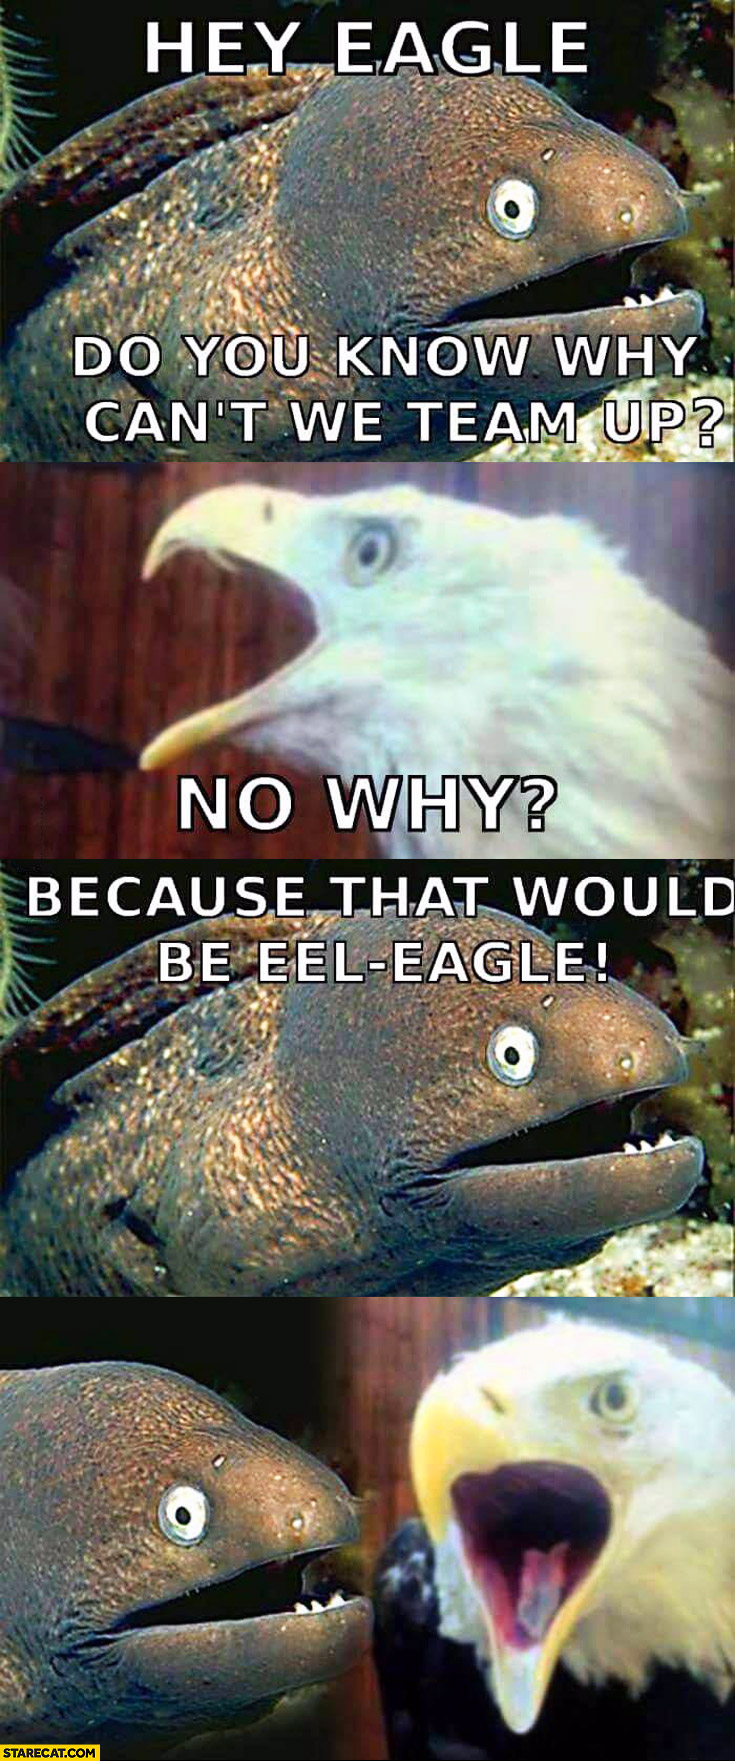 Hey eagle do you know why can’t we team up? Because that would be eel eagle